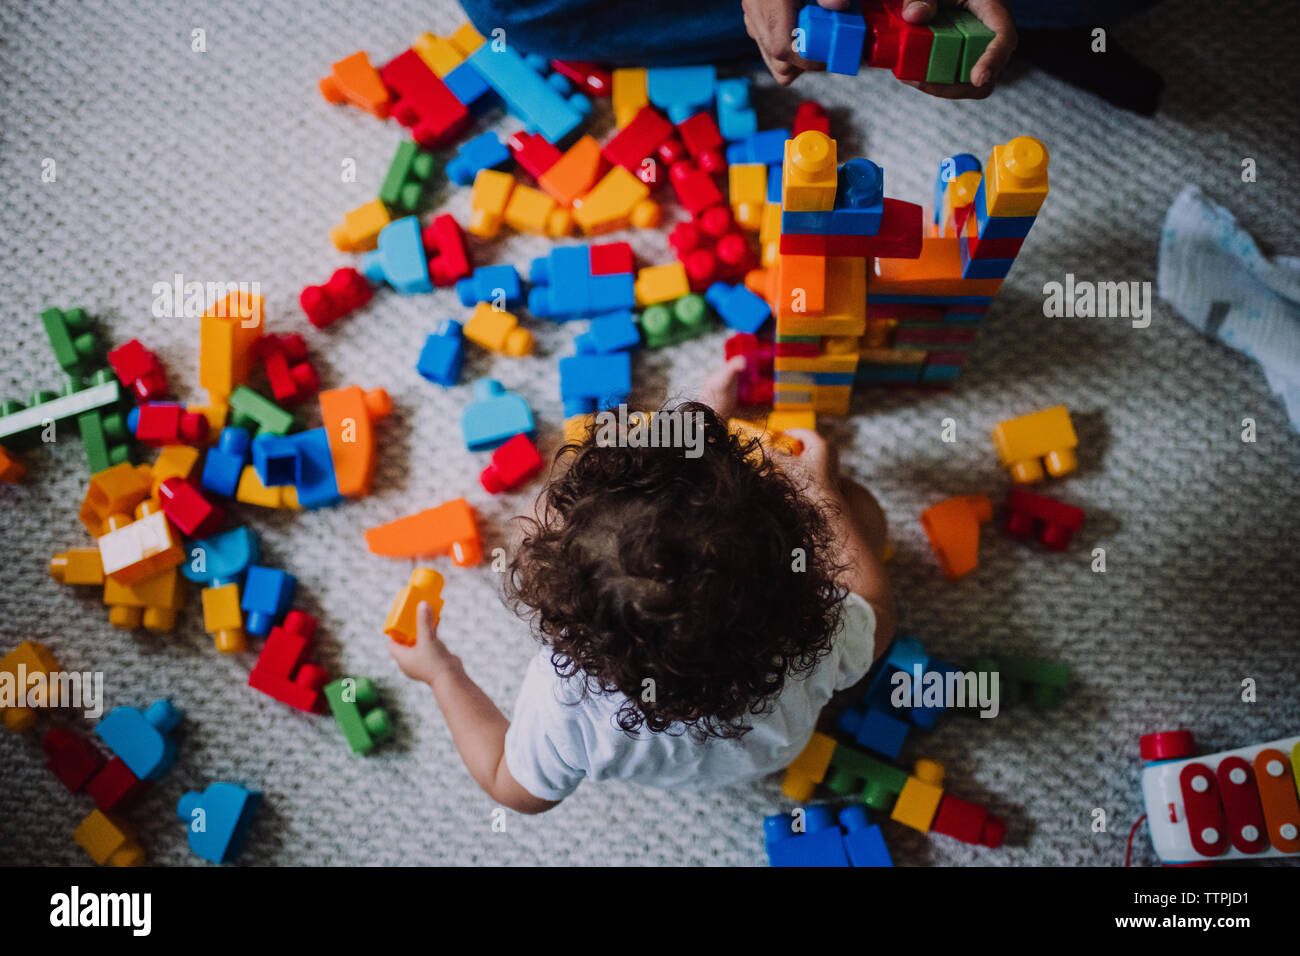 Toddler playing with blocks Stock Photo